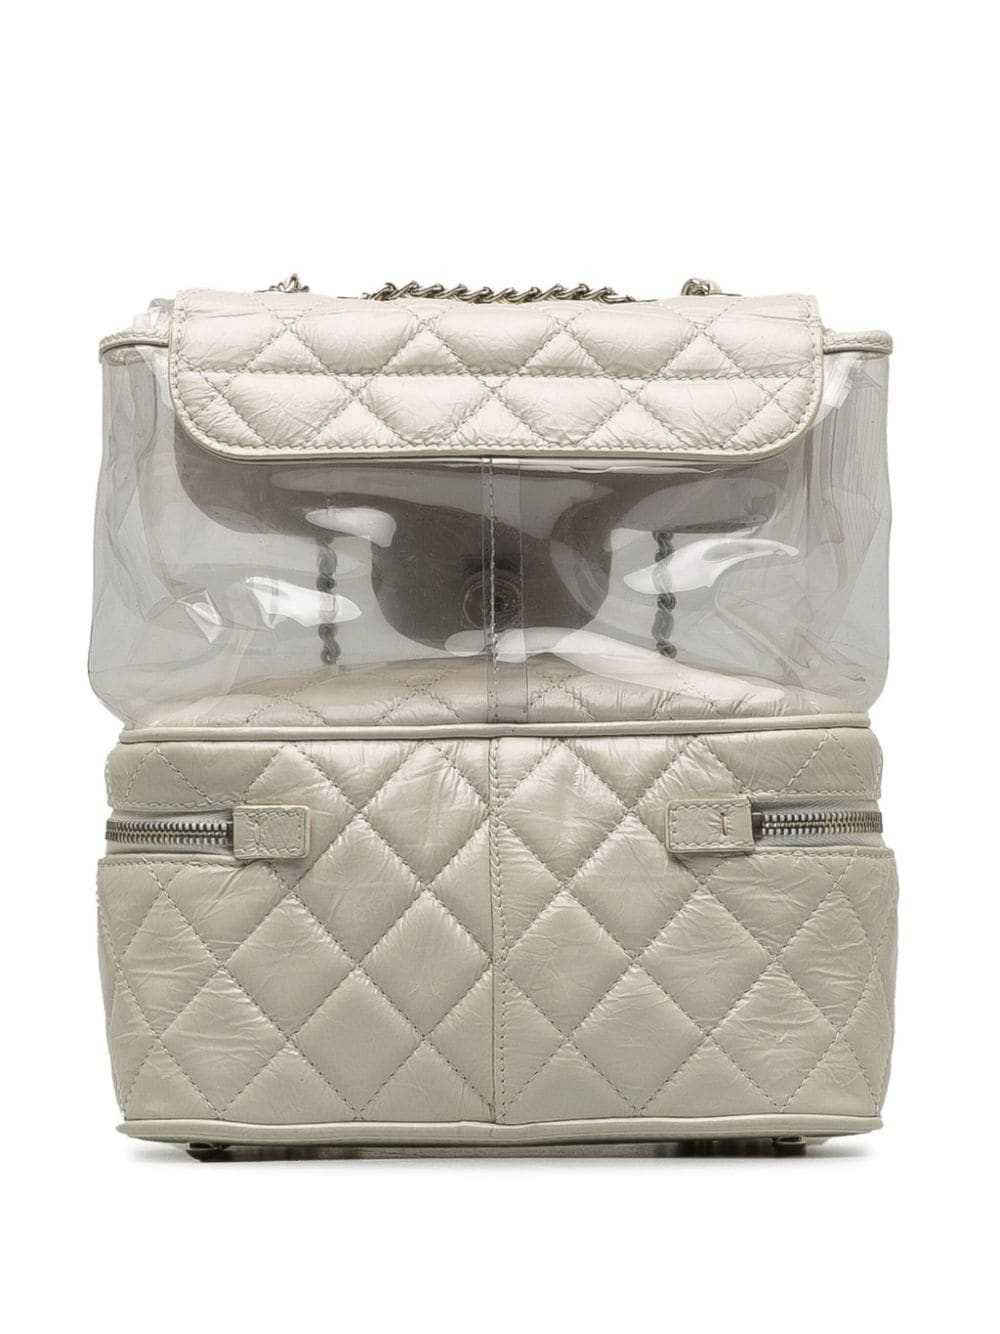 CHANEL Pre-Owned 2018 Aquarium backpack - White - image 2